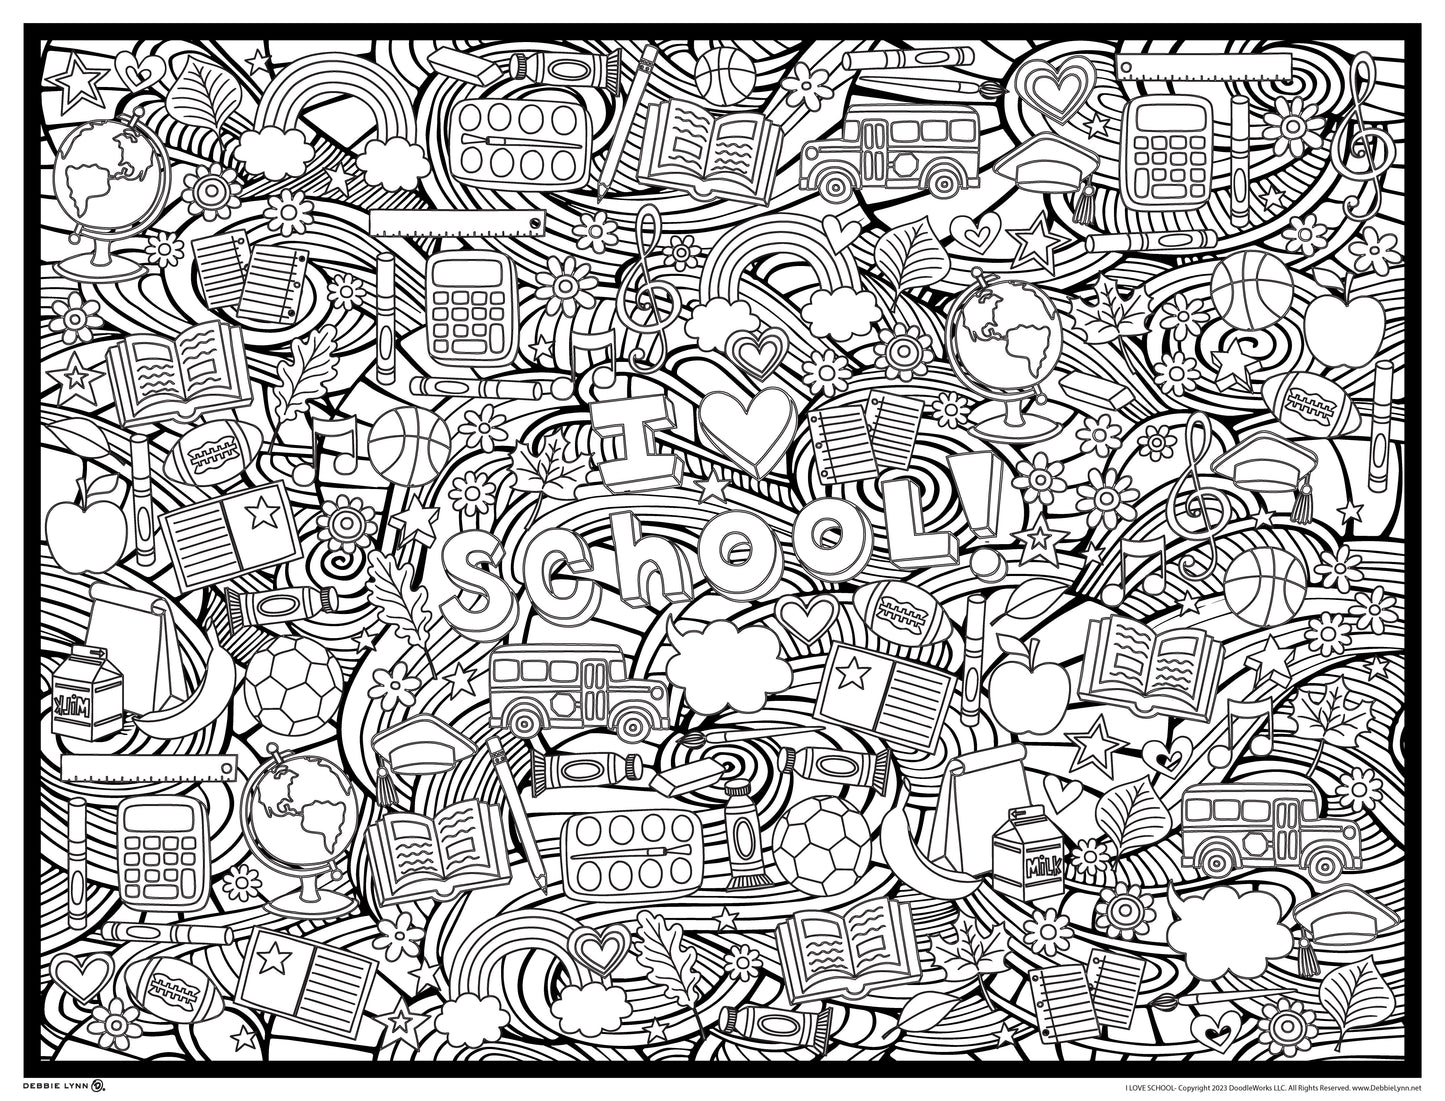 Love My Planet Giant Coloring Sheet - Poster House Shop